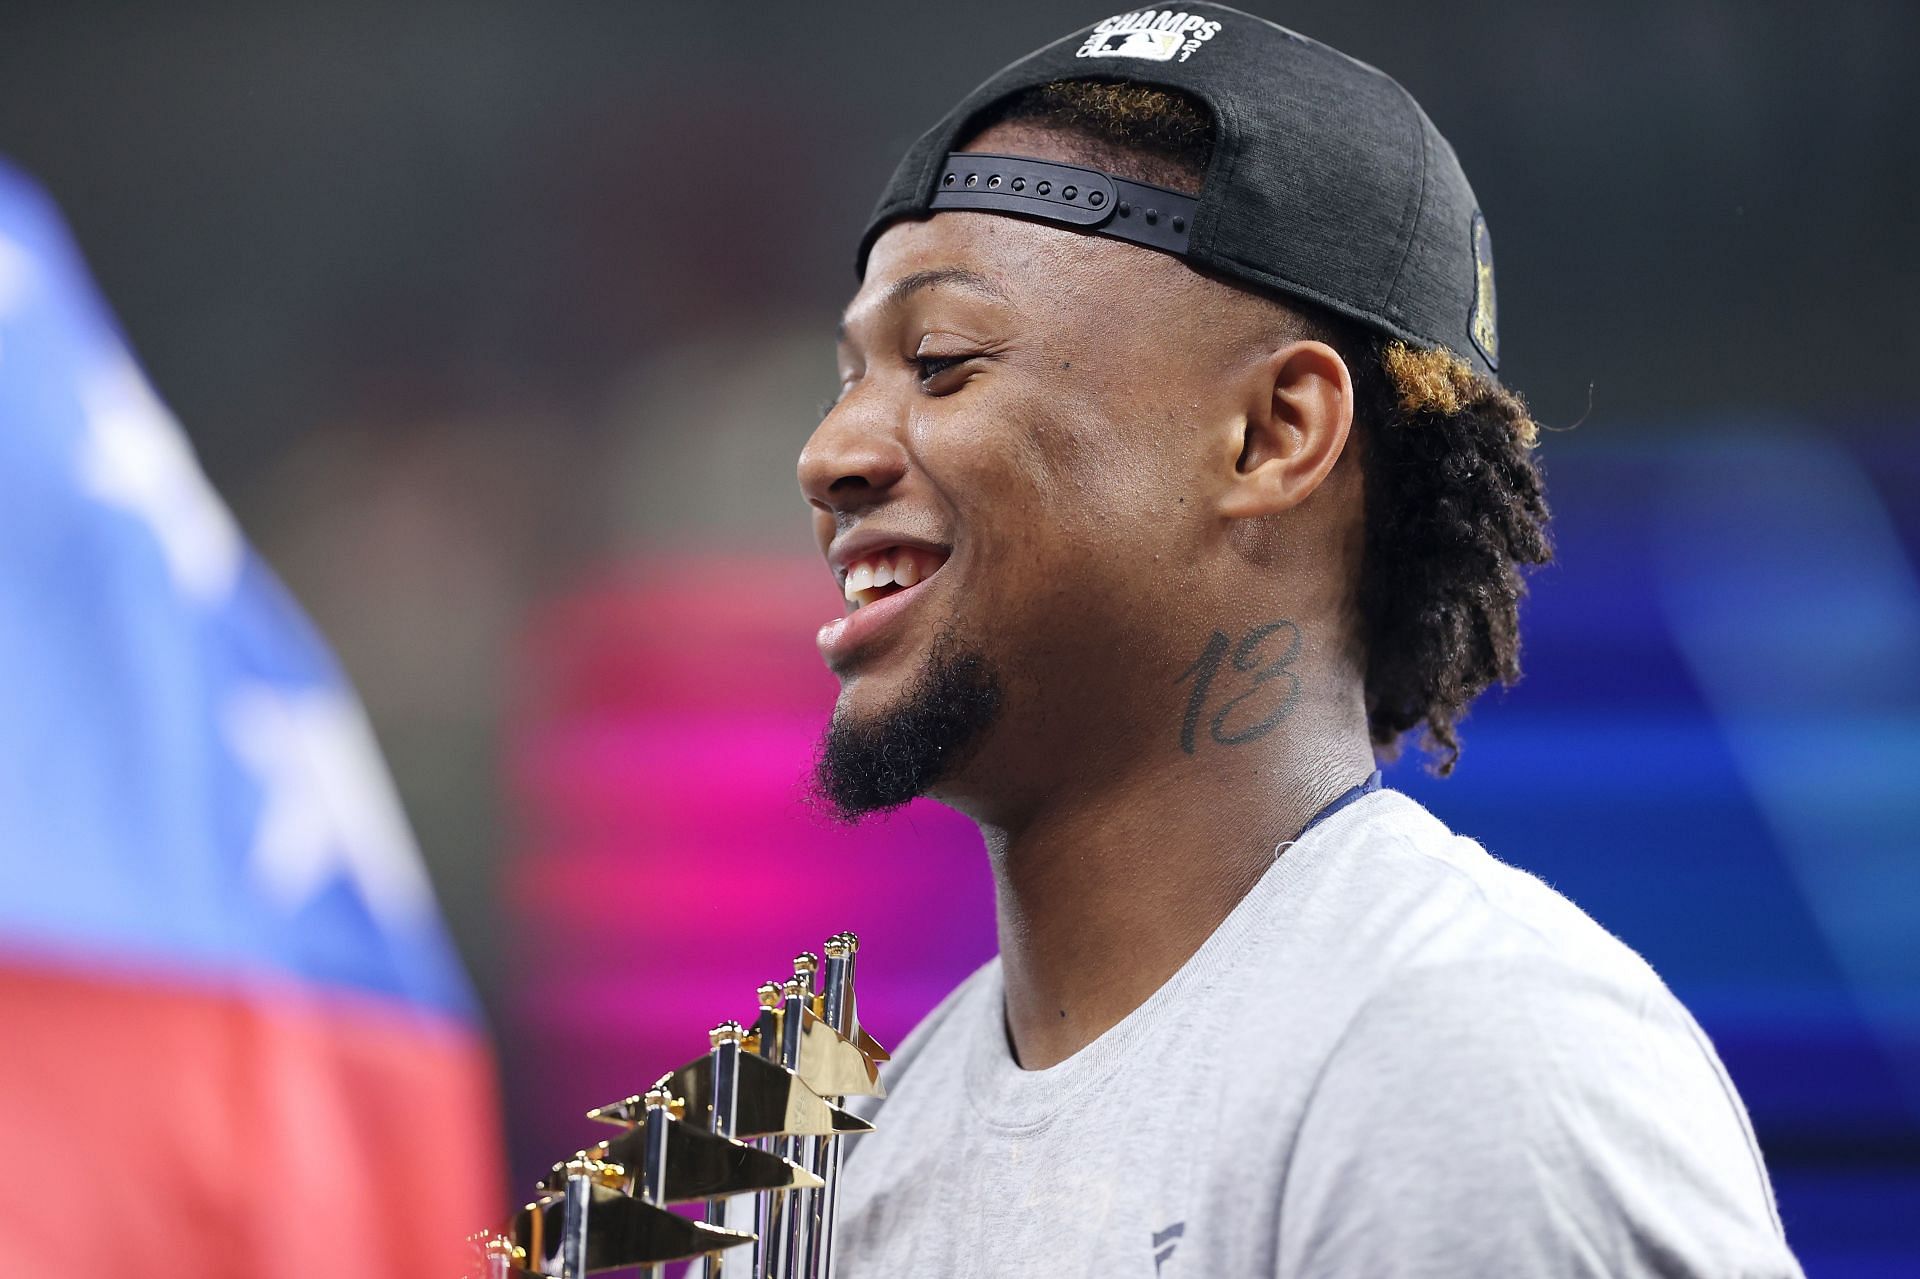 Atlanta Braves star Ronald Acuna Jr. will do &quot;anything for a fan&quot;